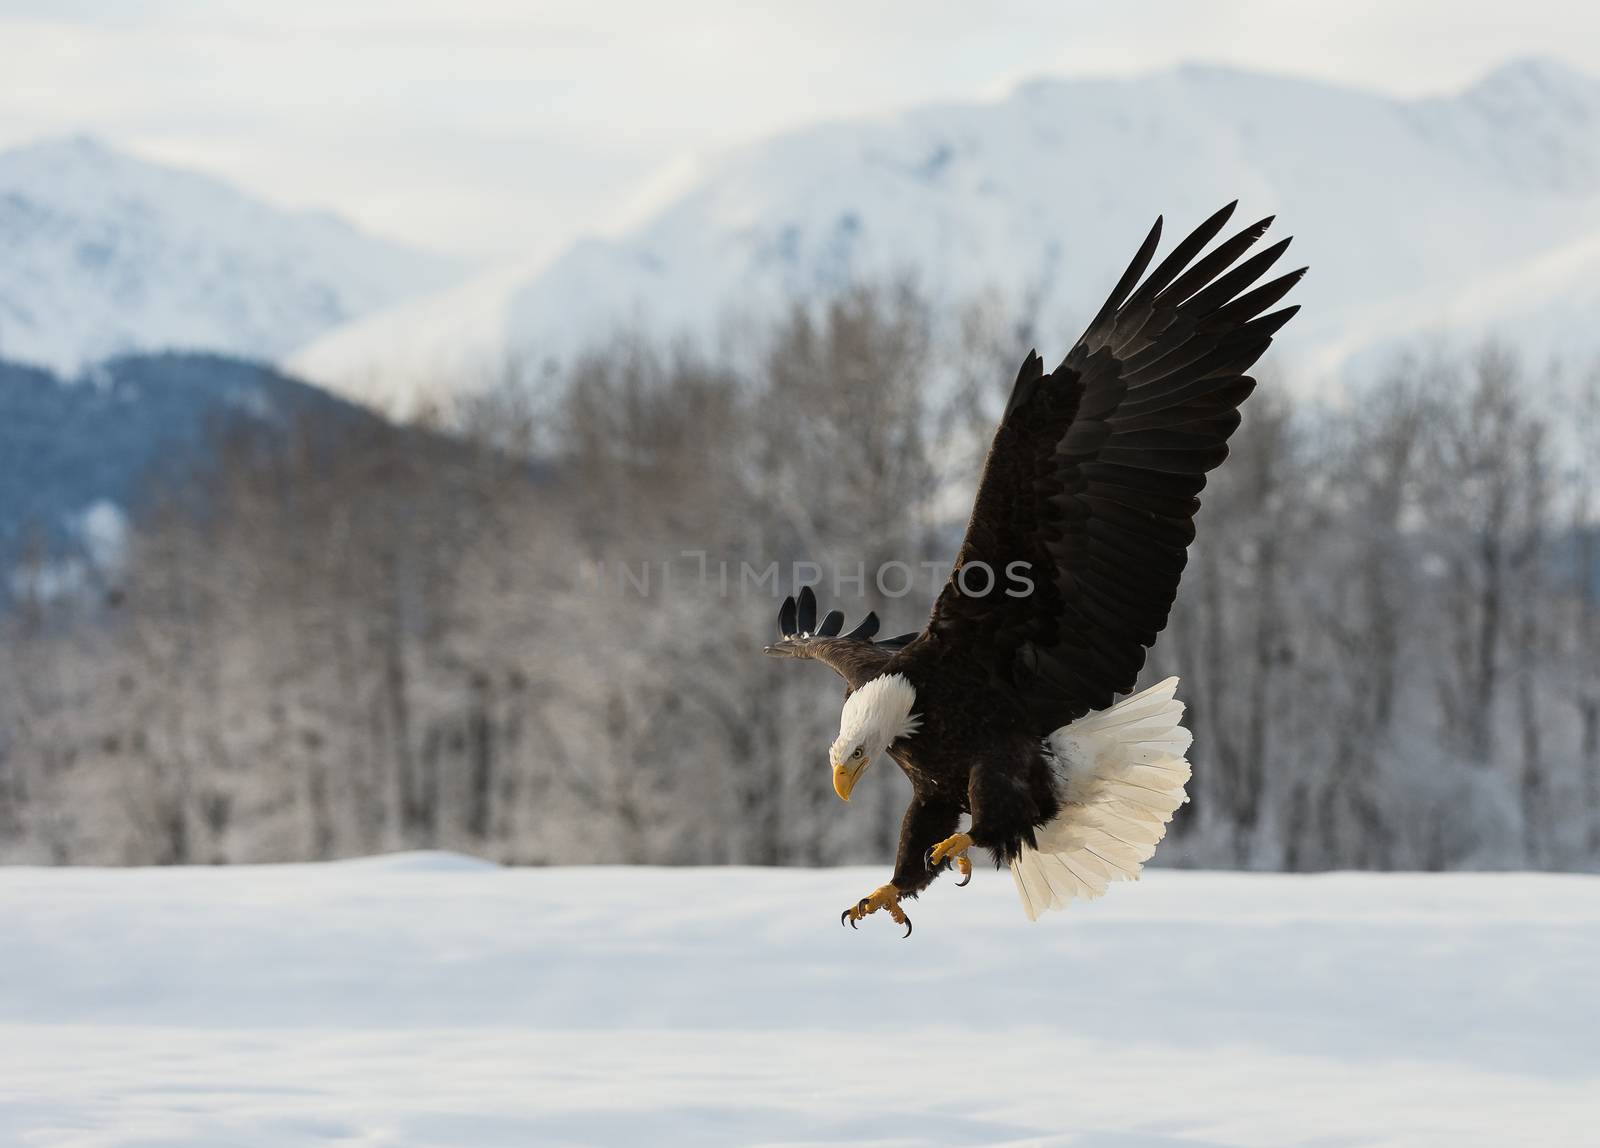 The Bald eagle landed by SURZ